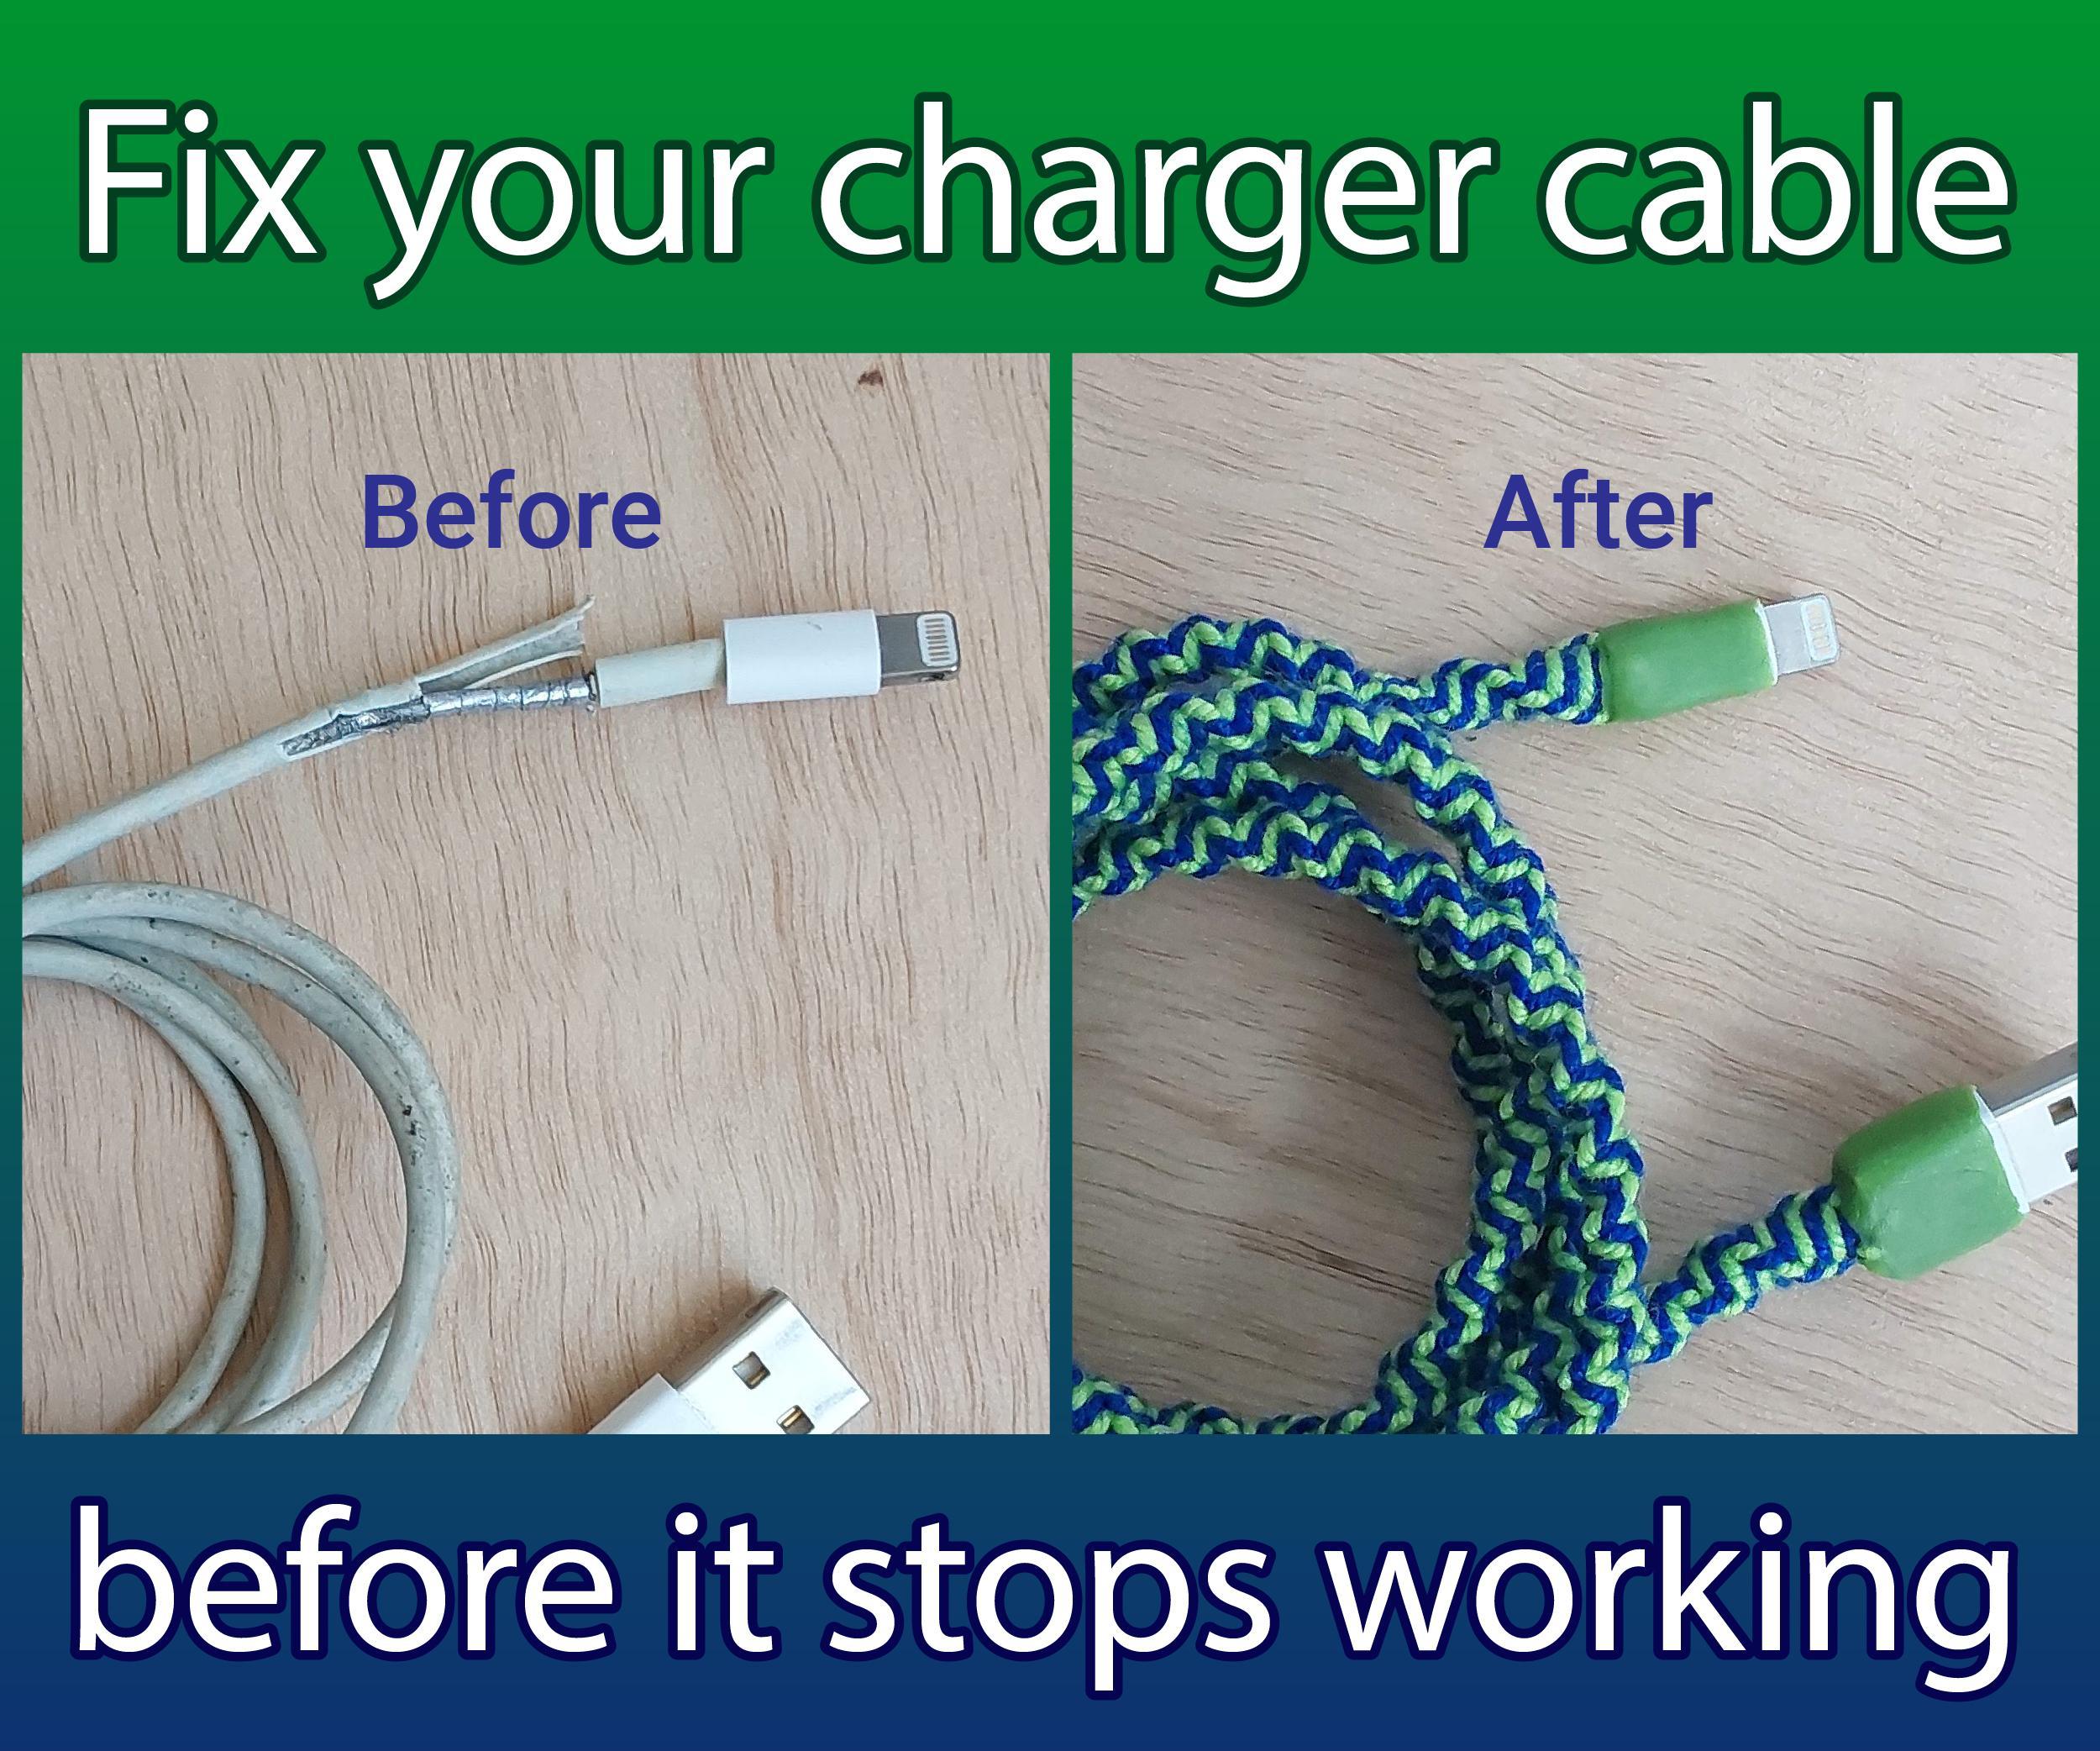 Fix Your Charger Cable Before It Stops Working